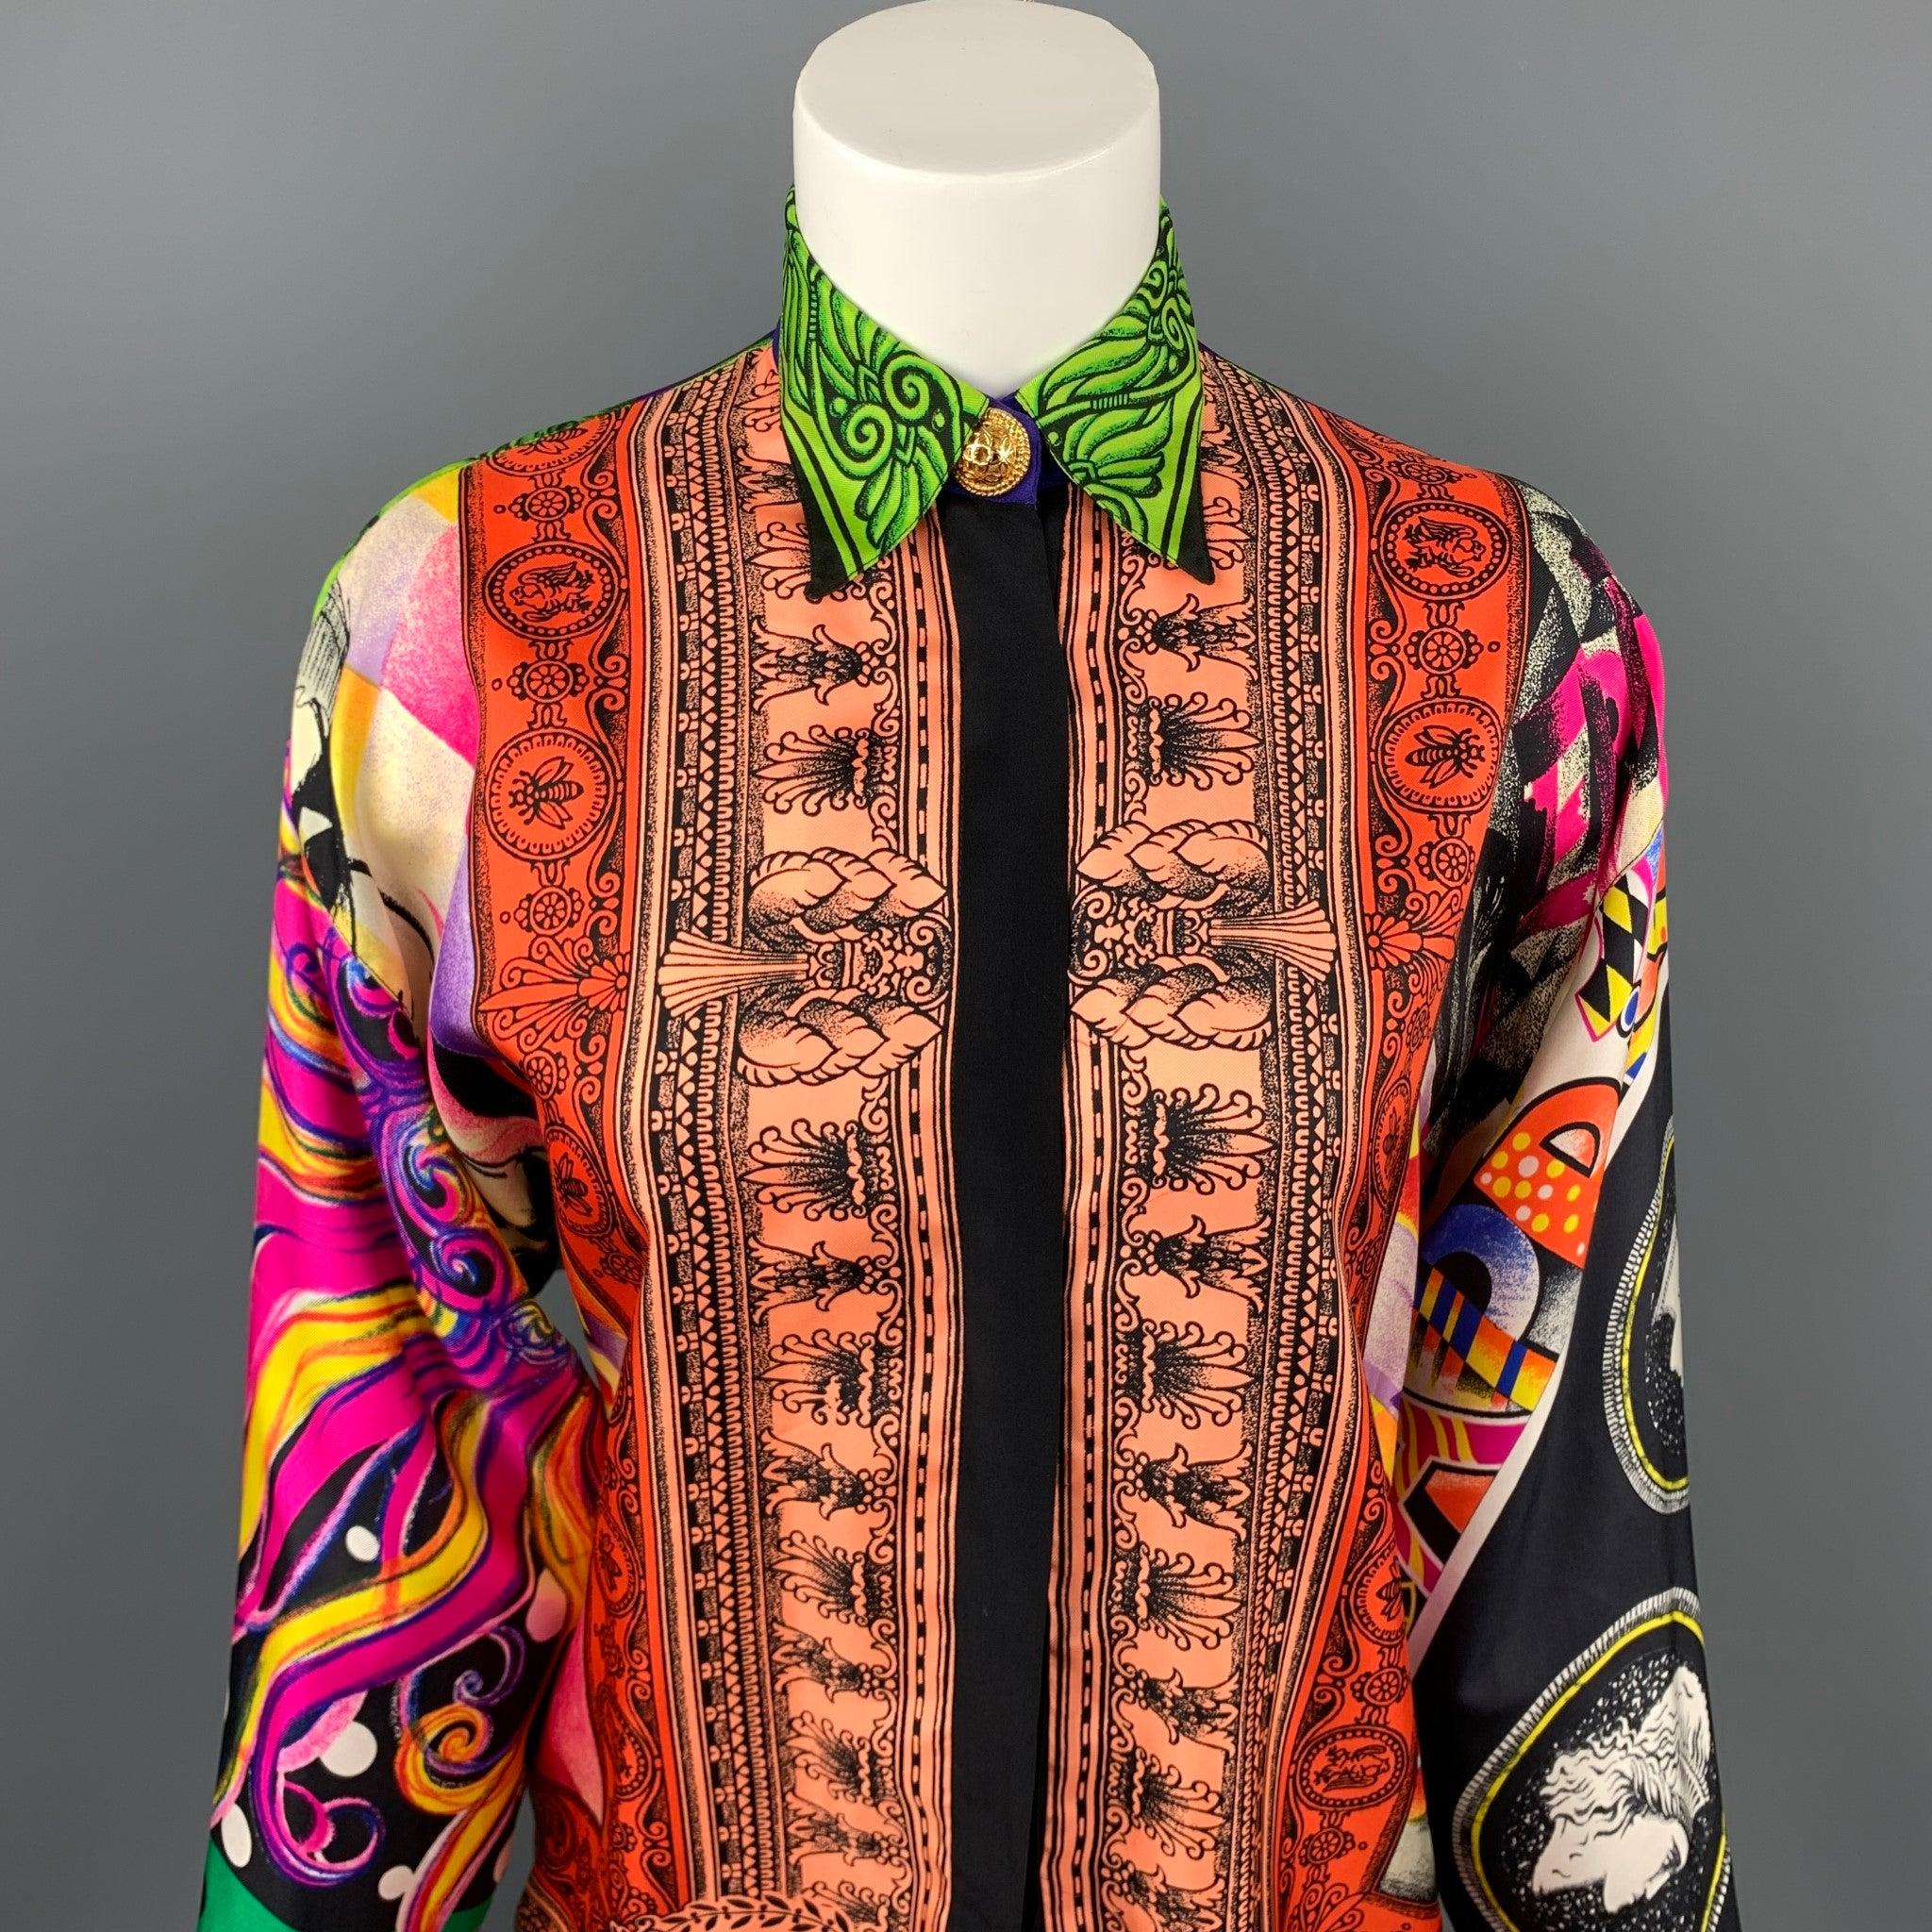 Vintage GIANNI VERSACE 90s Opera Balleto Teatro Cinema blouse comes in a multi-color baroque silk featuring gold button details, spread collar, and a hidden button closure. Minor discoloration. Made in Italy.Very Good Pre-Owned Condition.